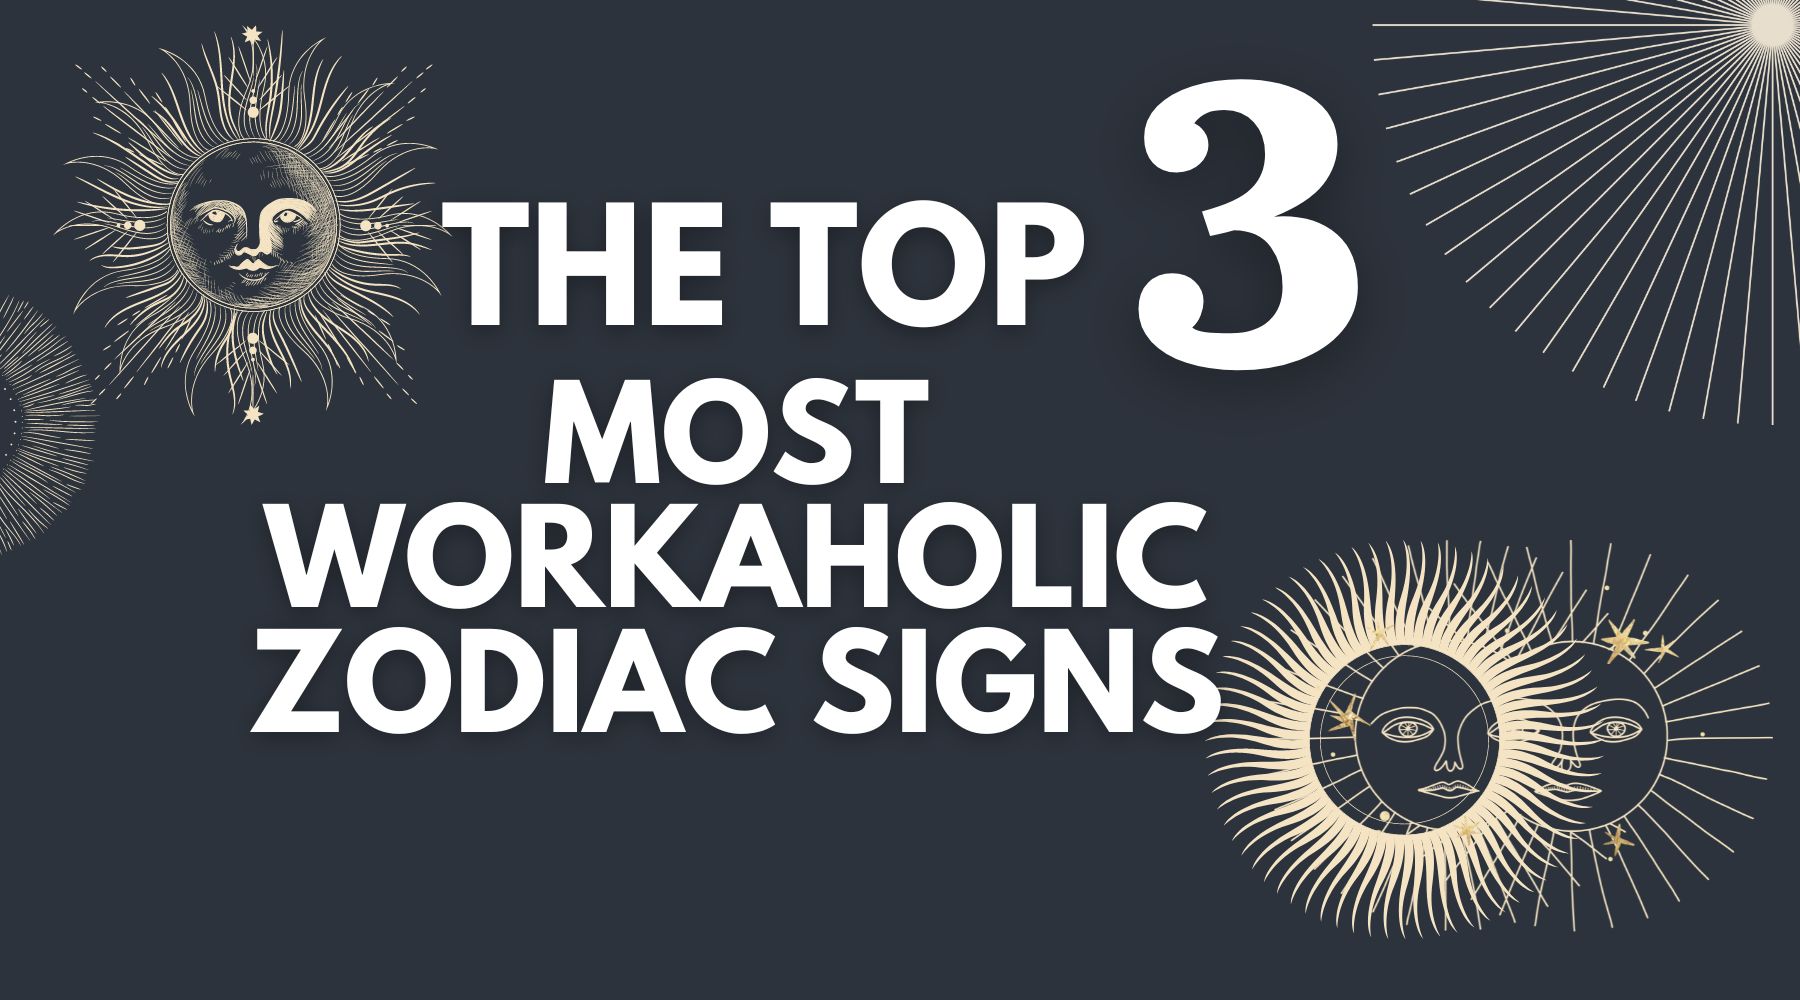 The Top 3 Most Workaholic Zodiac Signs Ranked From Most Workaholic to Least Workaholic